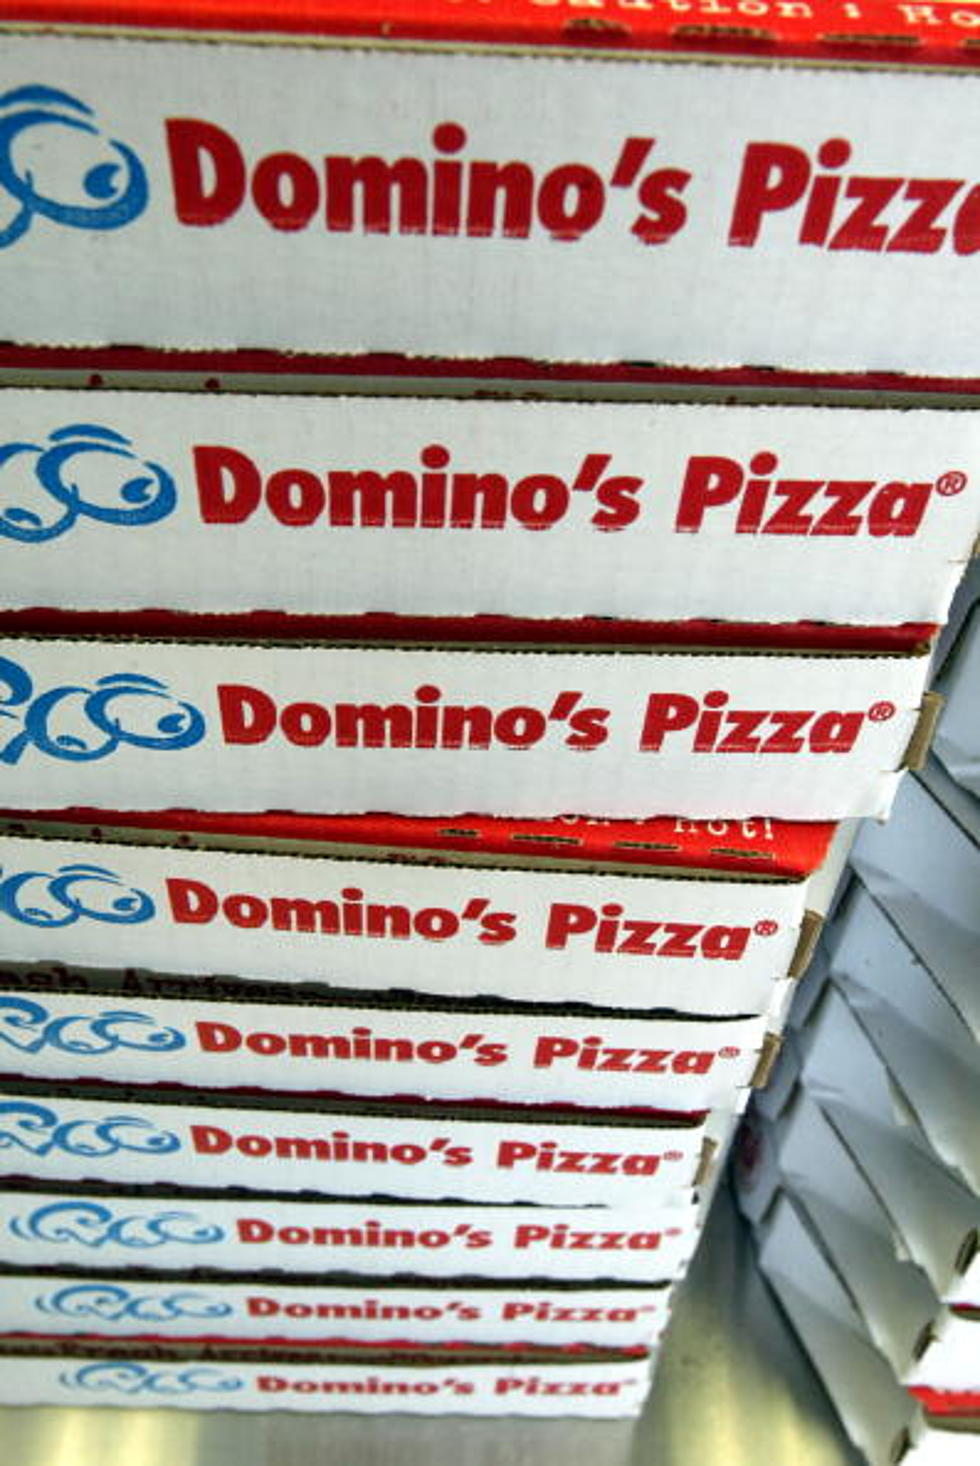 Domino’s Is Building A New Location On The Moon!